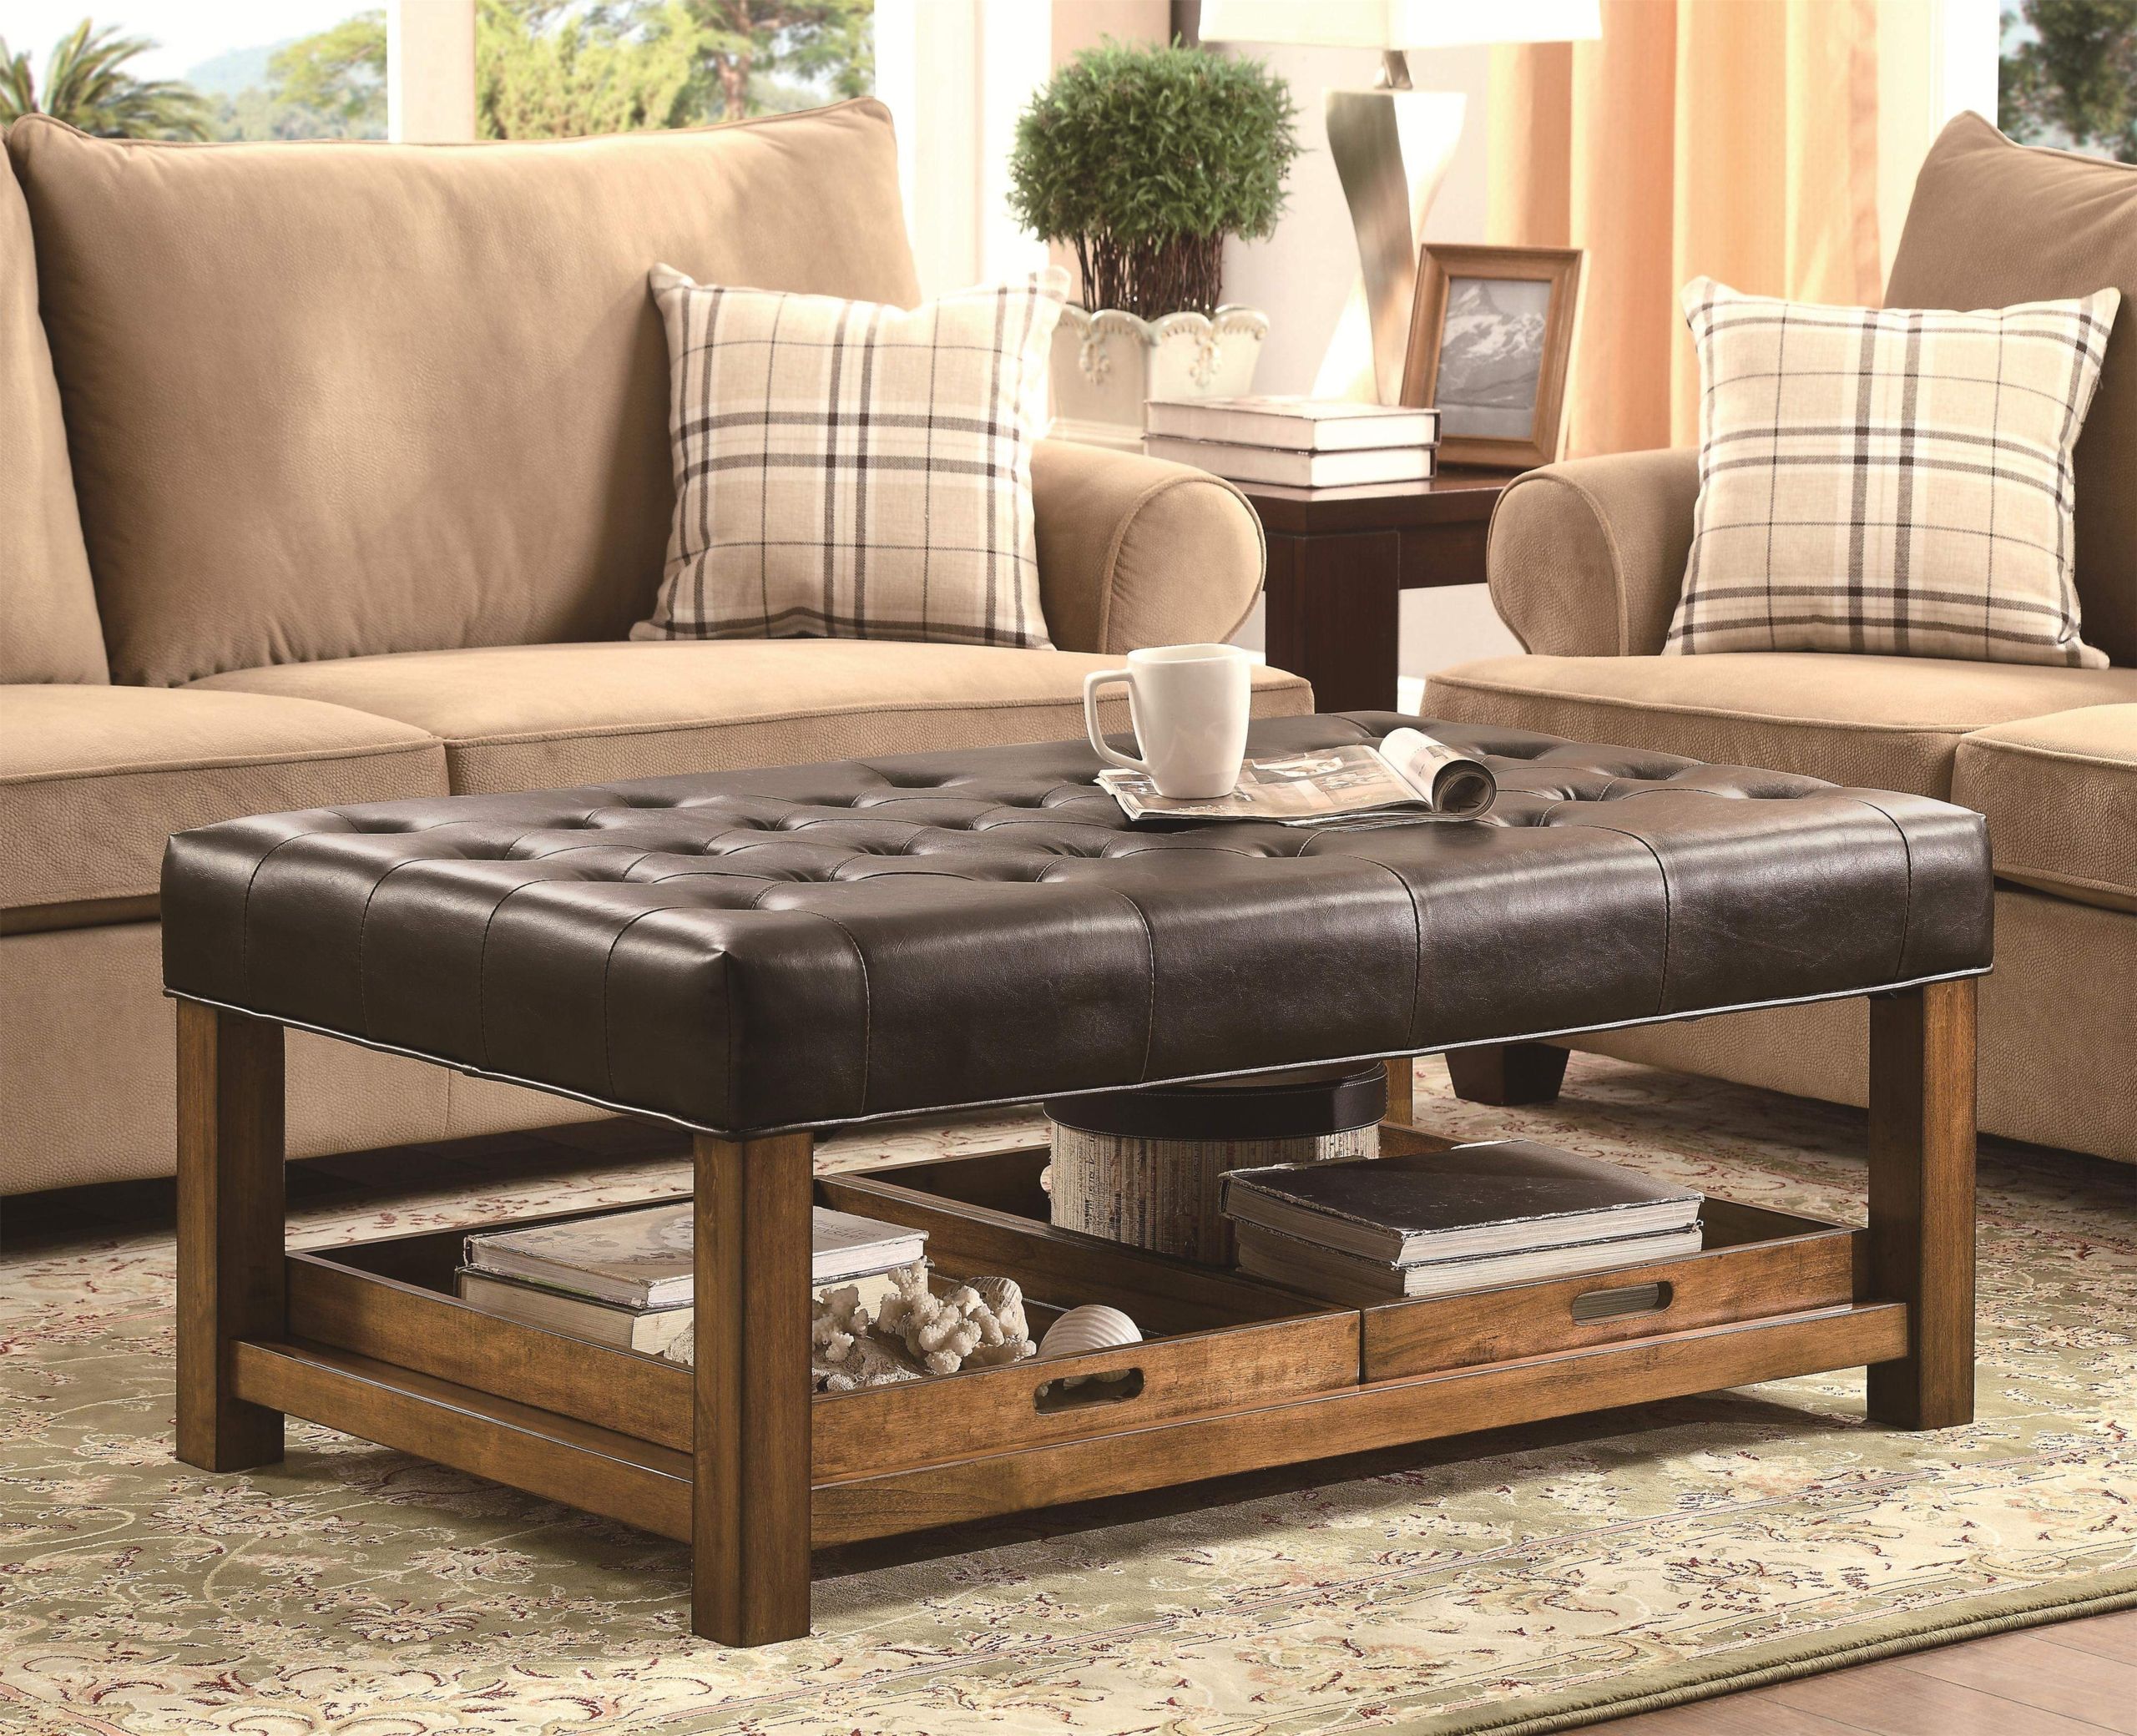 Leather Tufted Ottoman Coffee Table – Ideas On Foter Intended For Brown Leather Ottomans (View 15 of 15)